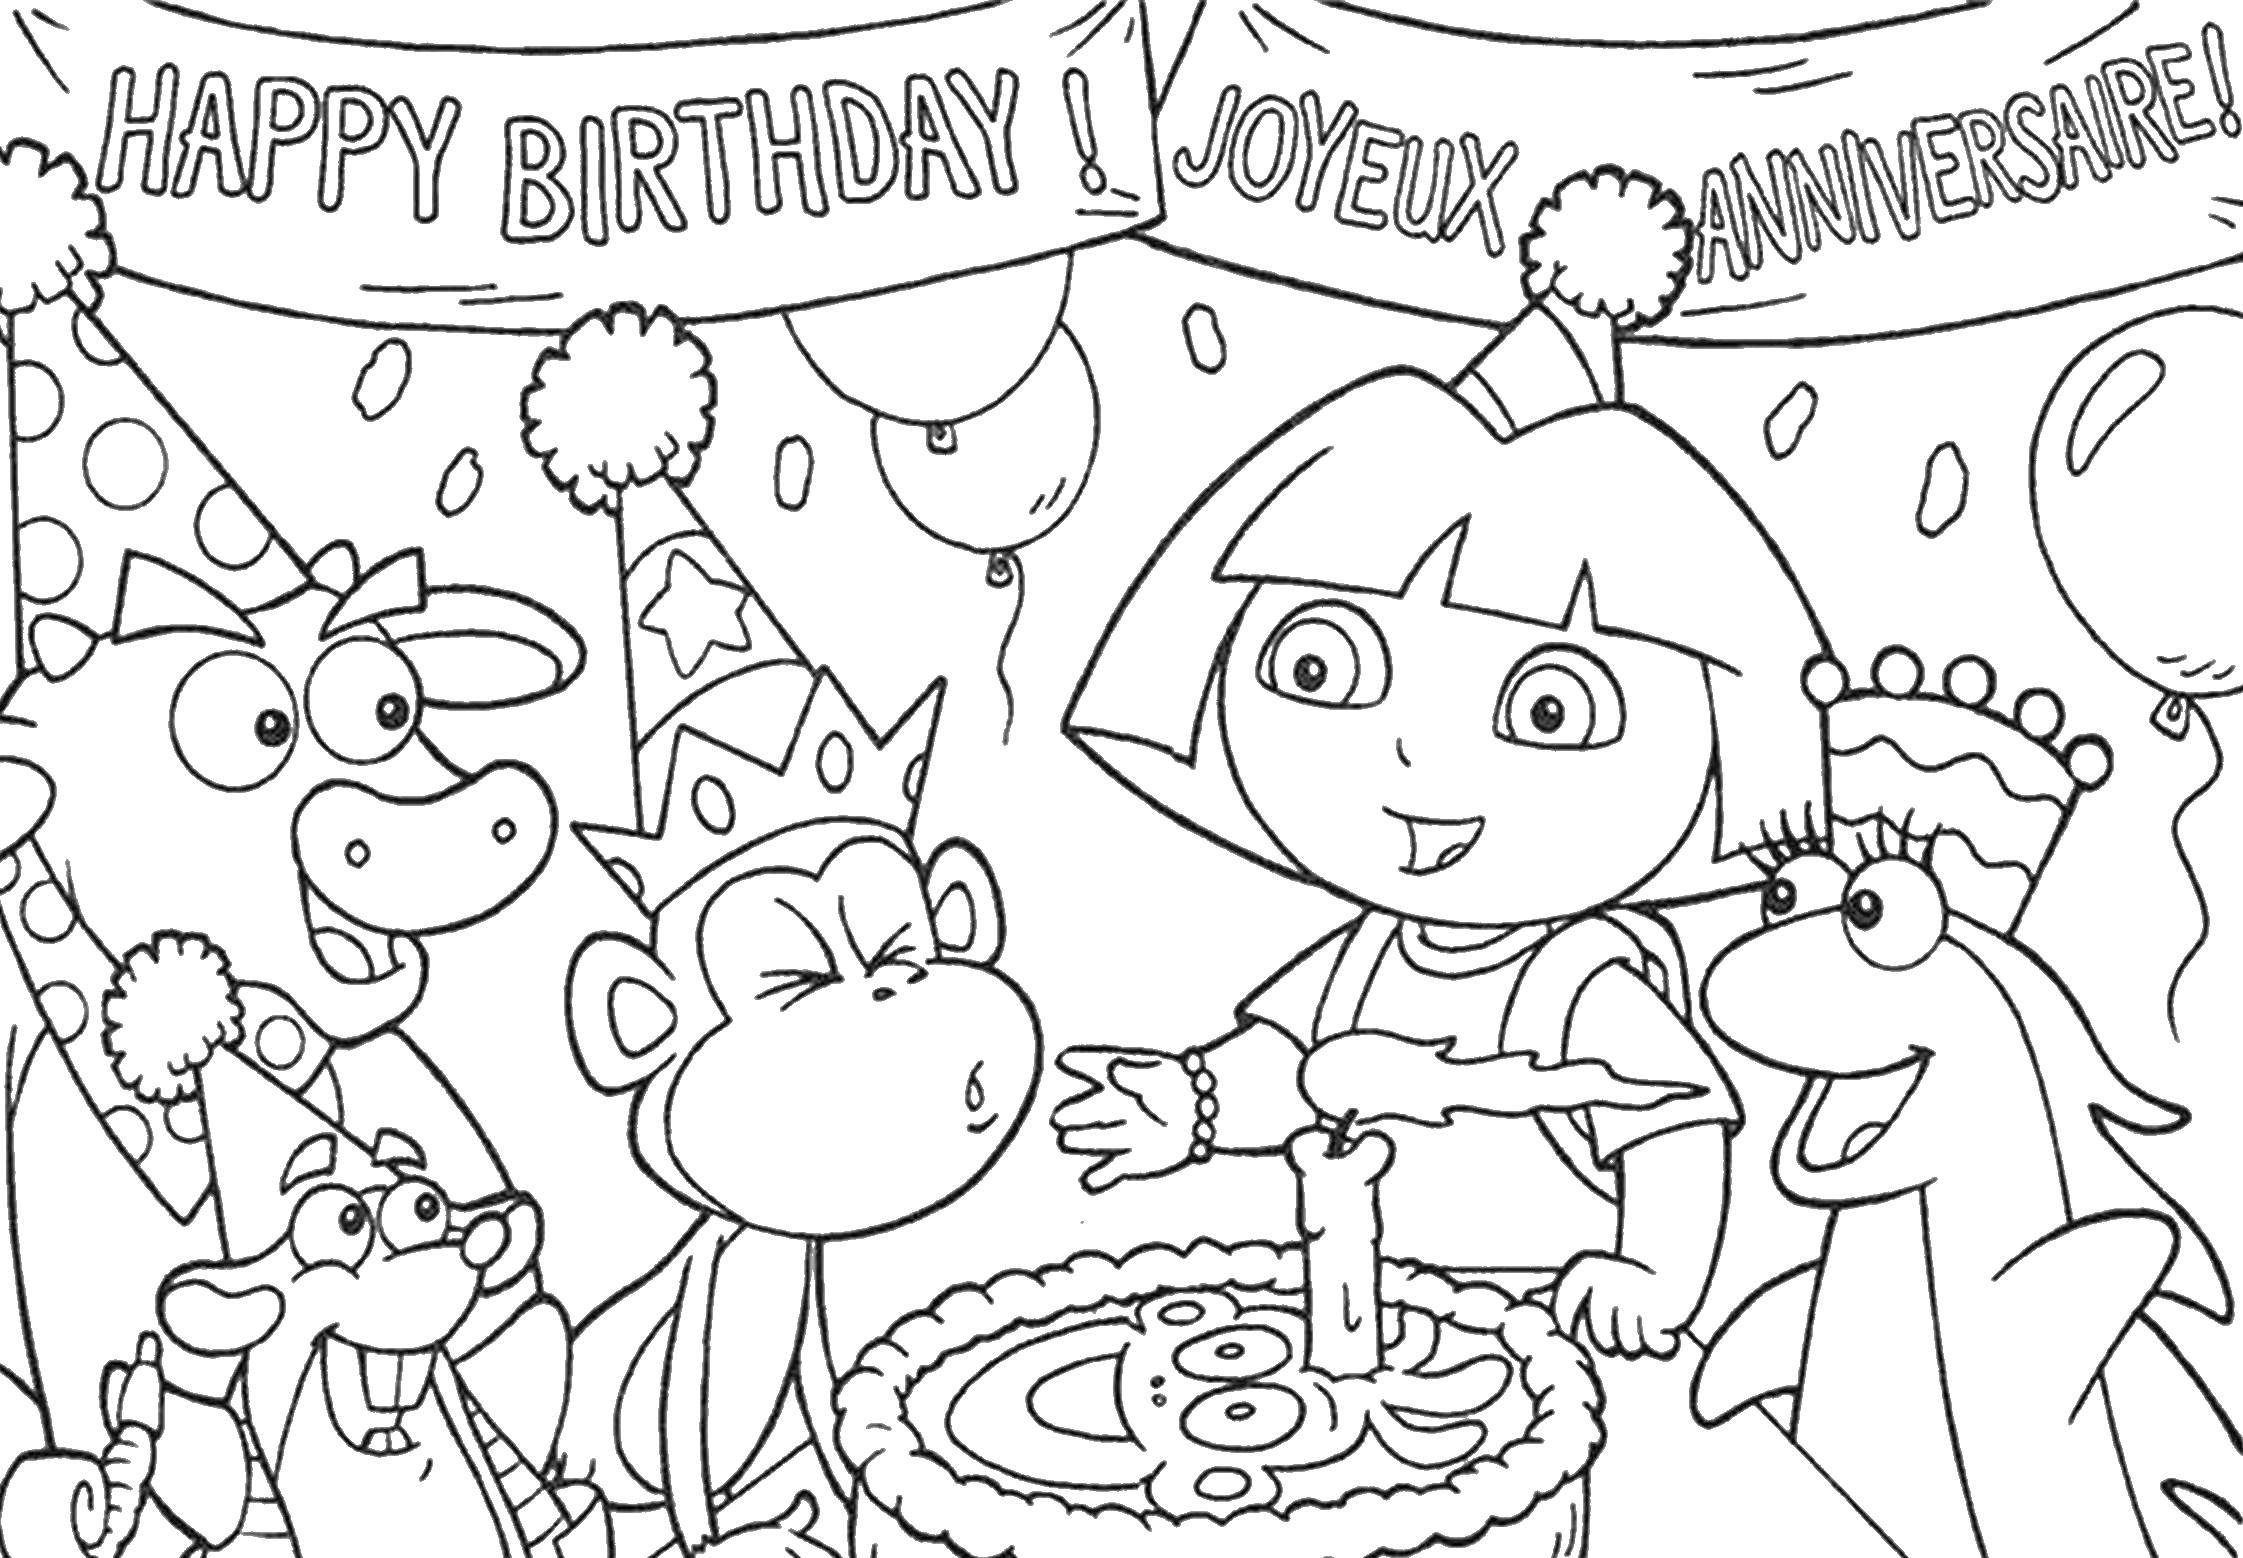 Coloring The slipper is 1 year old. Category birthday. Tags:  Cartoon character.